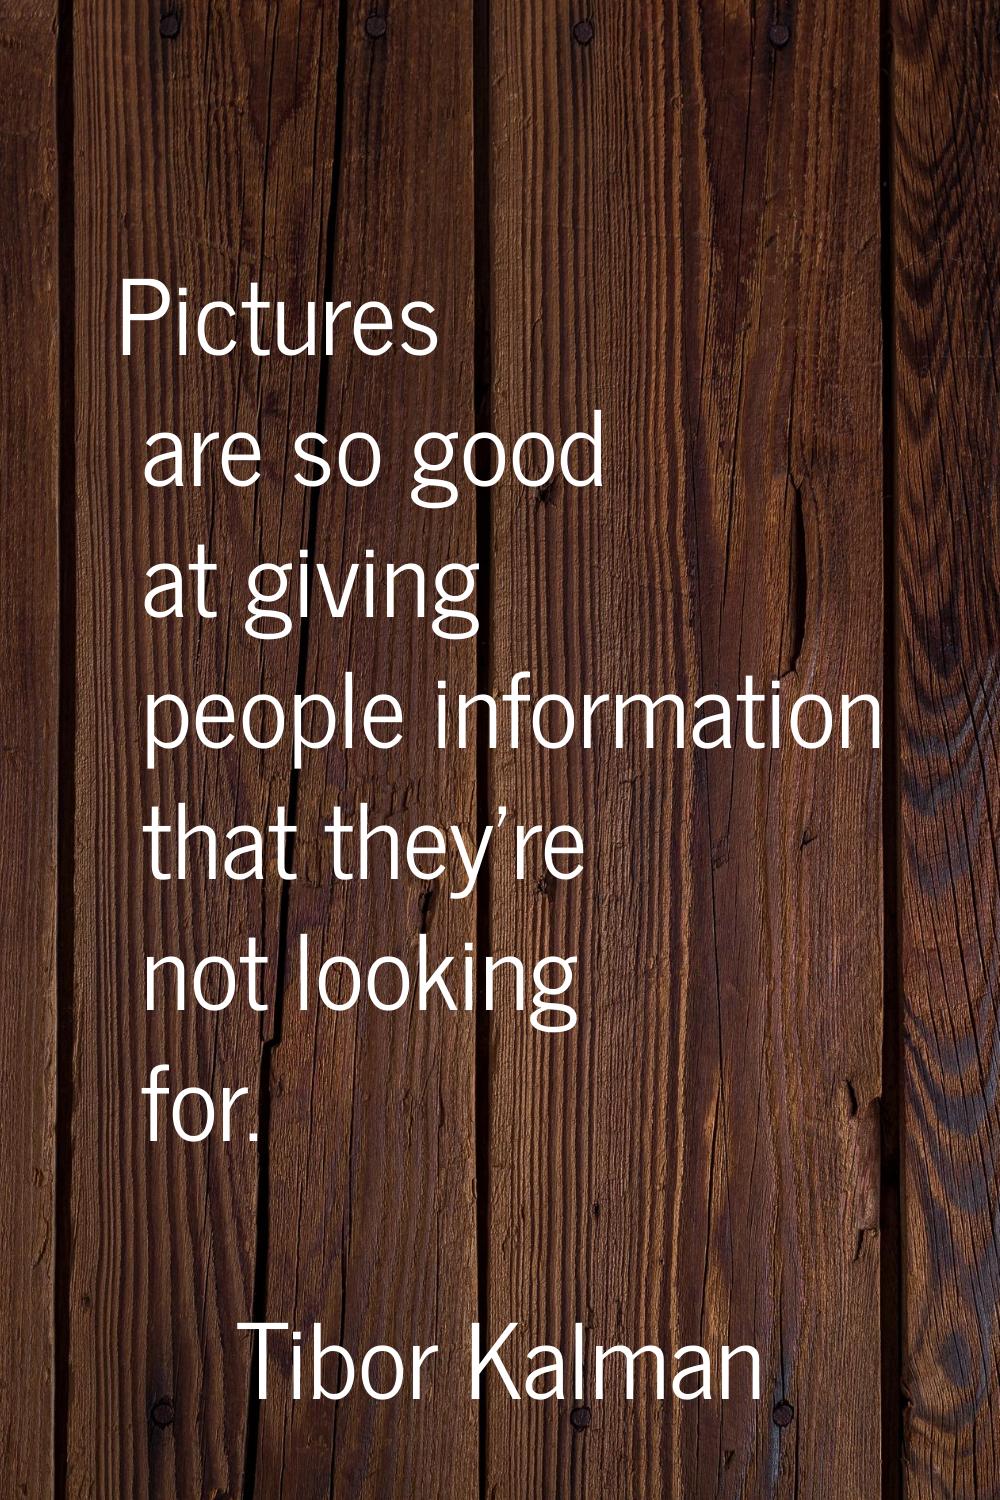 Pictures are so good at giving people information that they're not looking for.